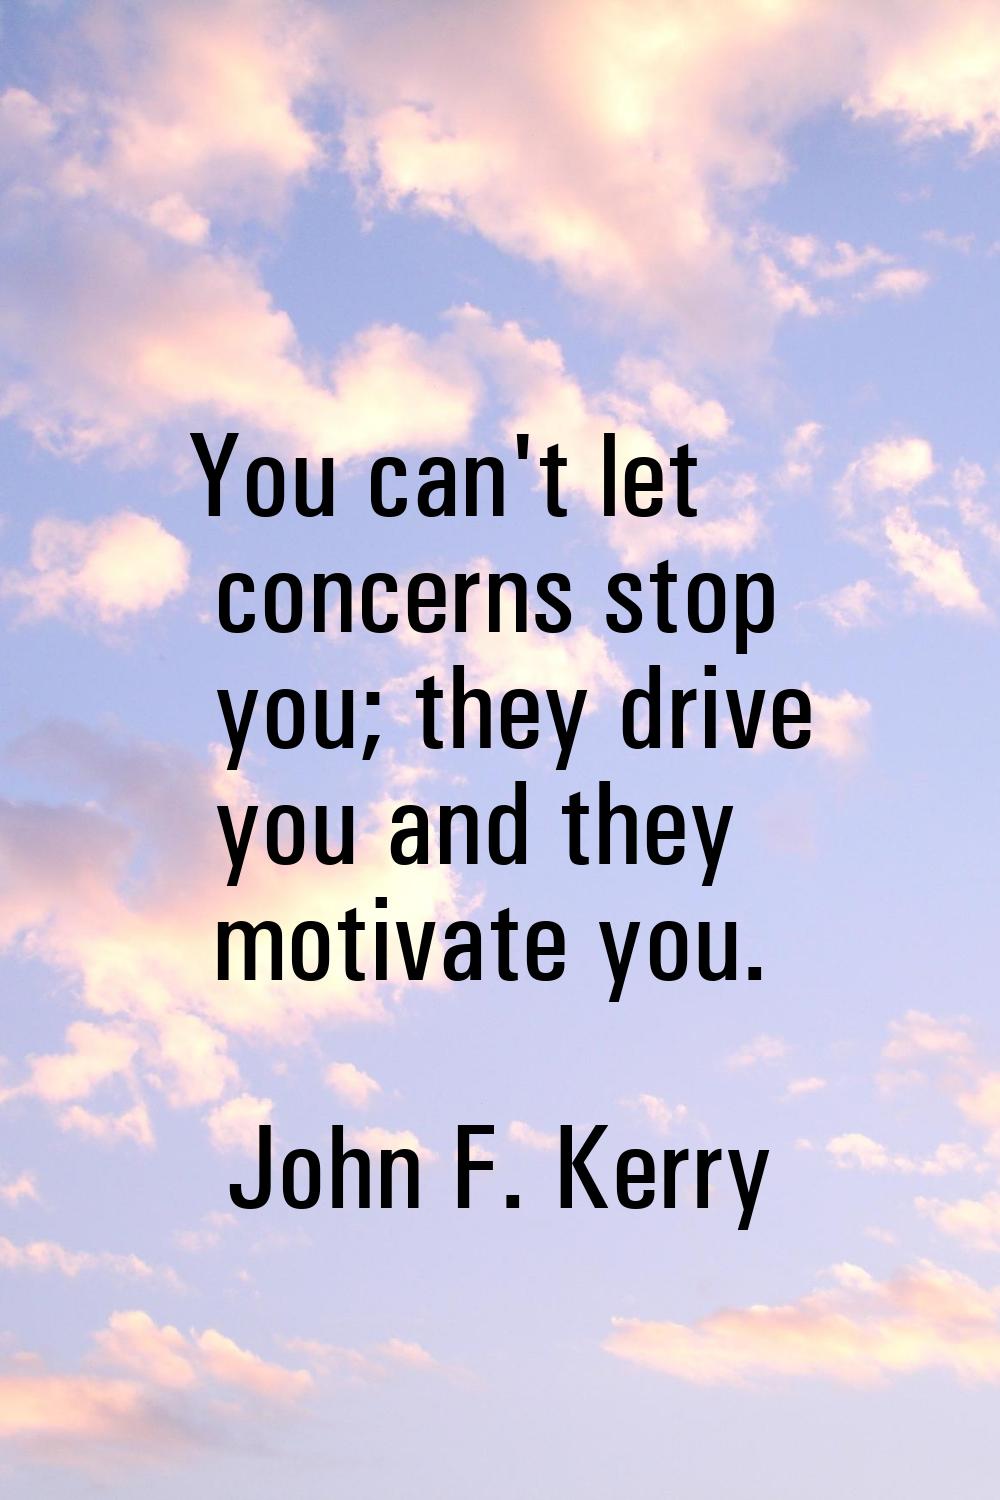 You can't let concerns stop you; they drive you and they motivate you.